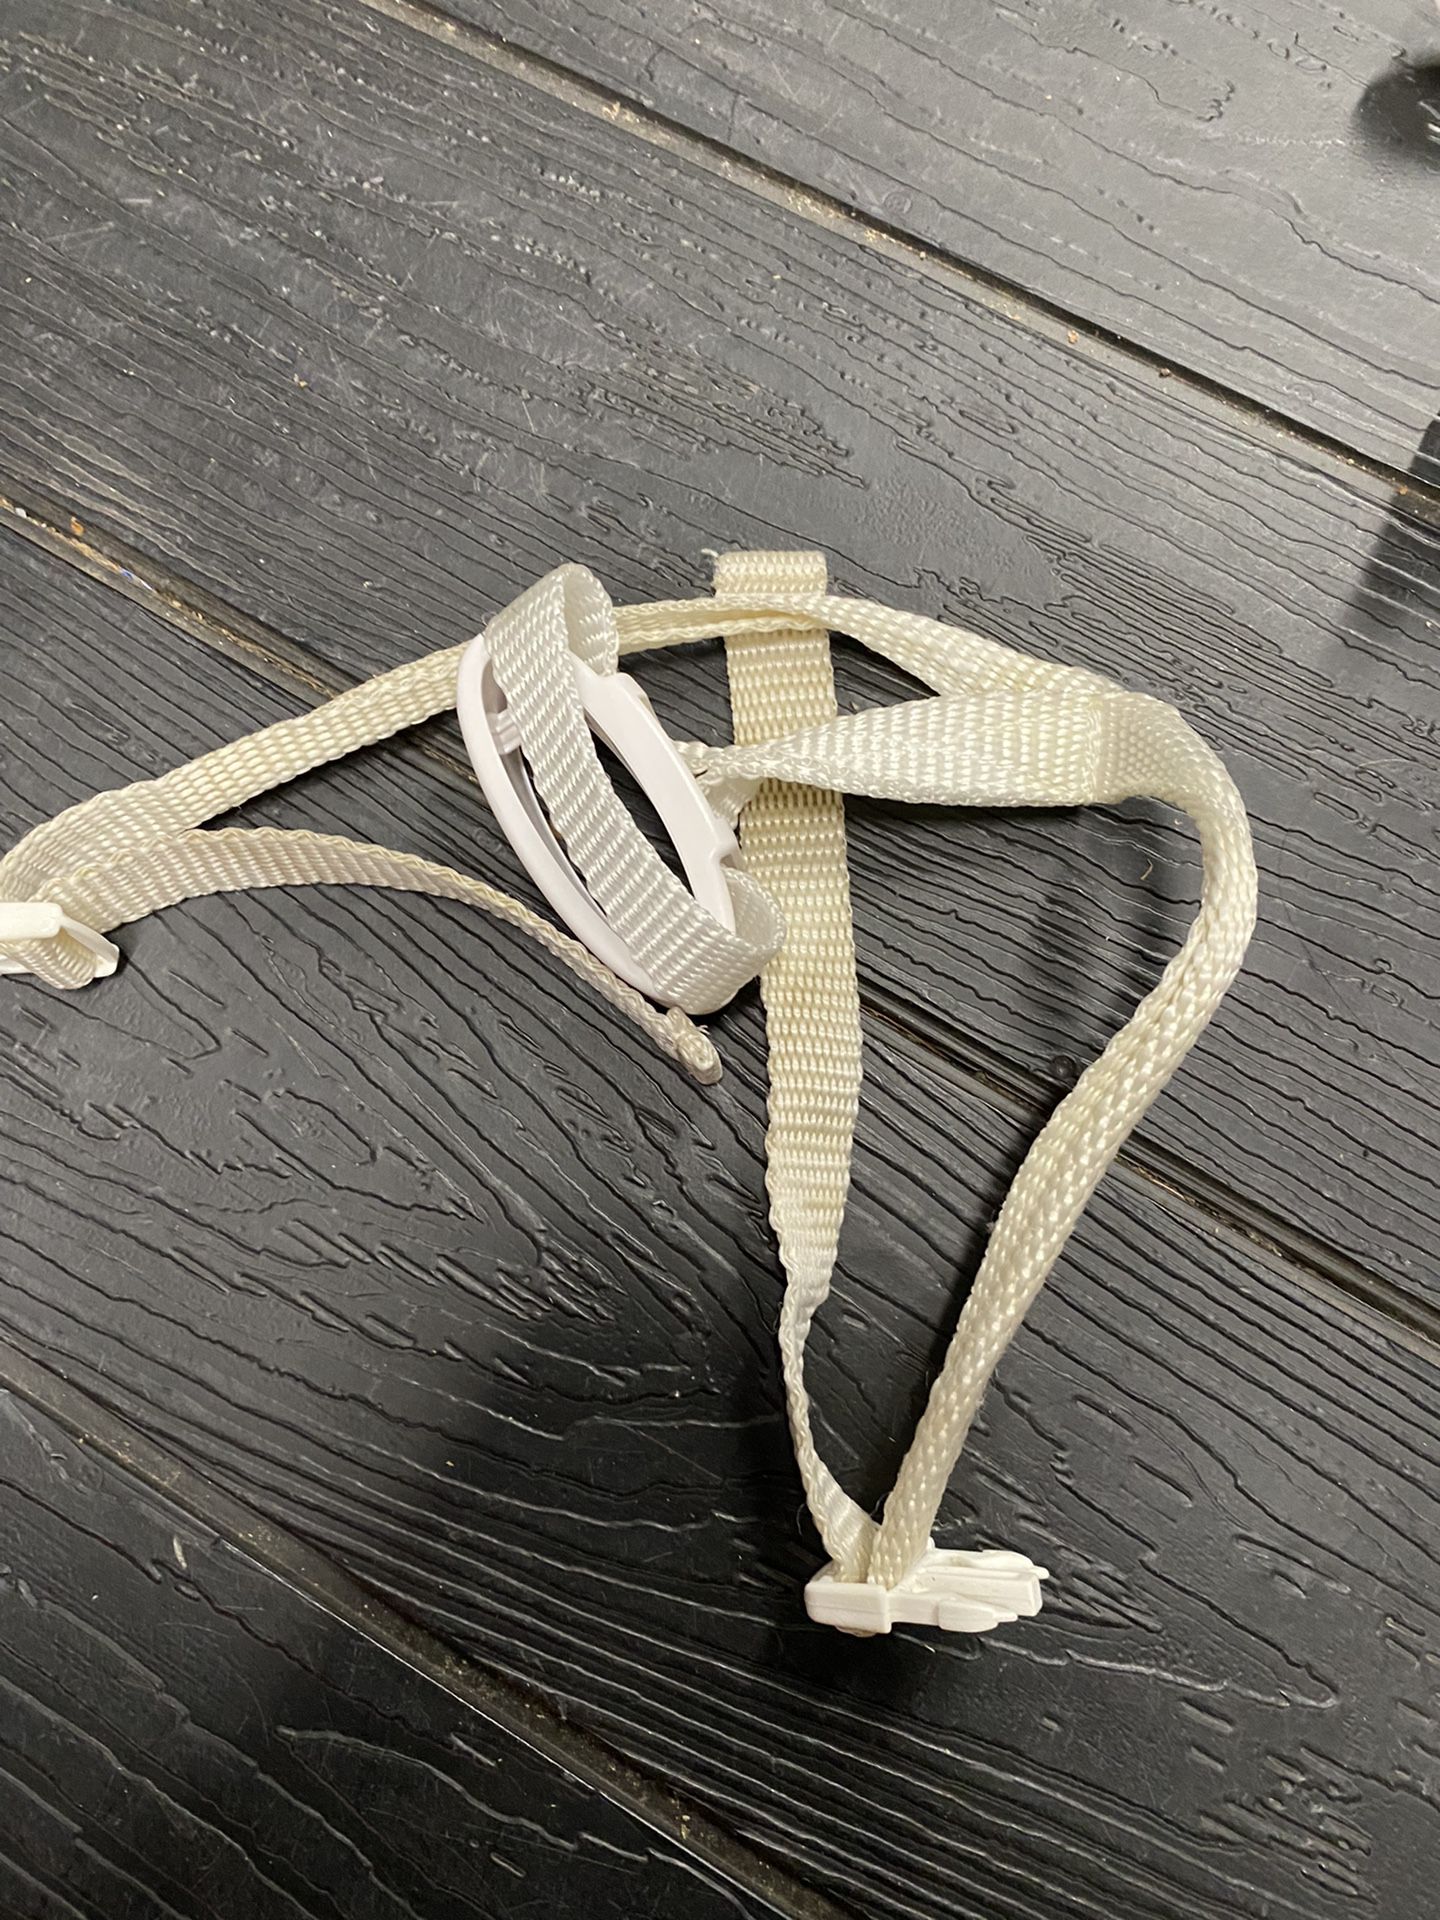 4Moms MamaRoo Replacement Parts White Safety Buckle Straps From 2017 Swing